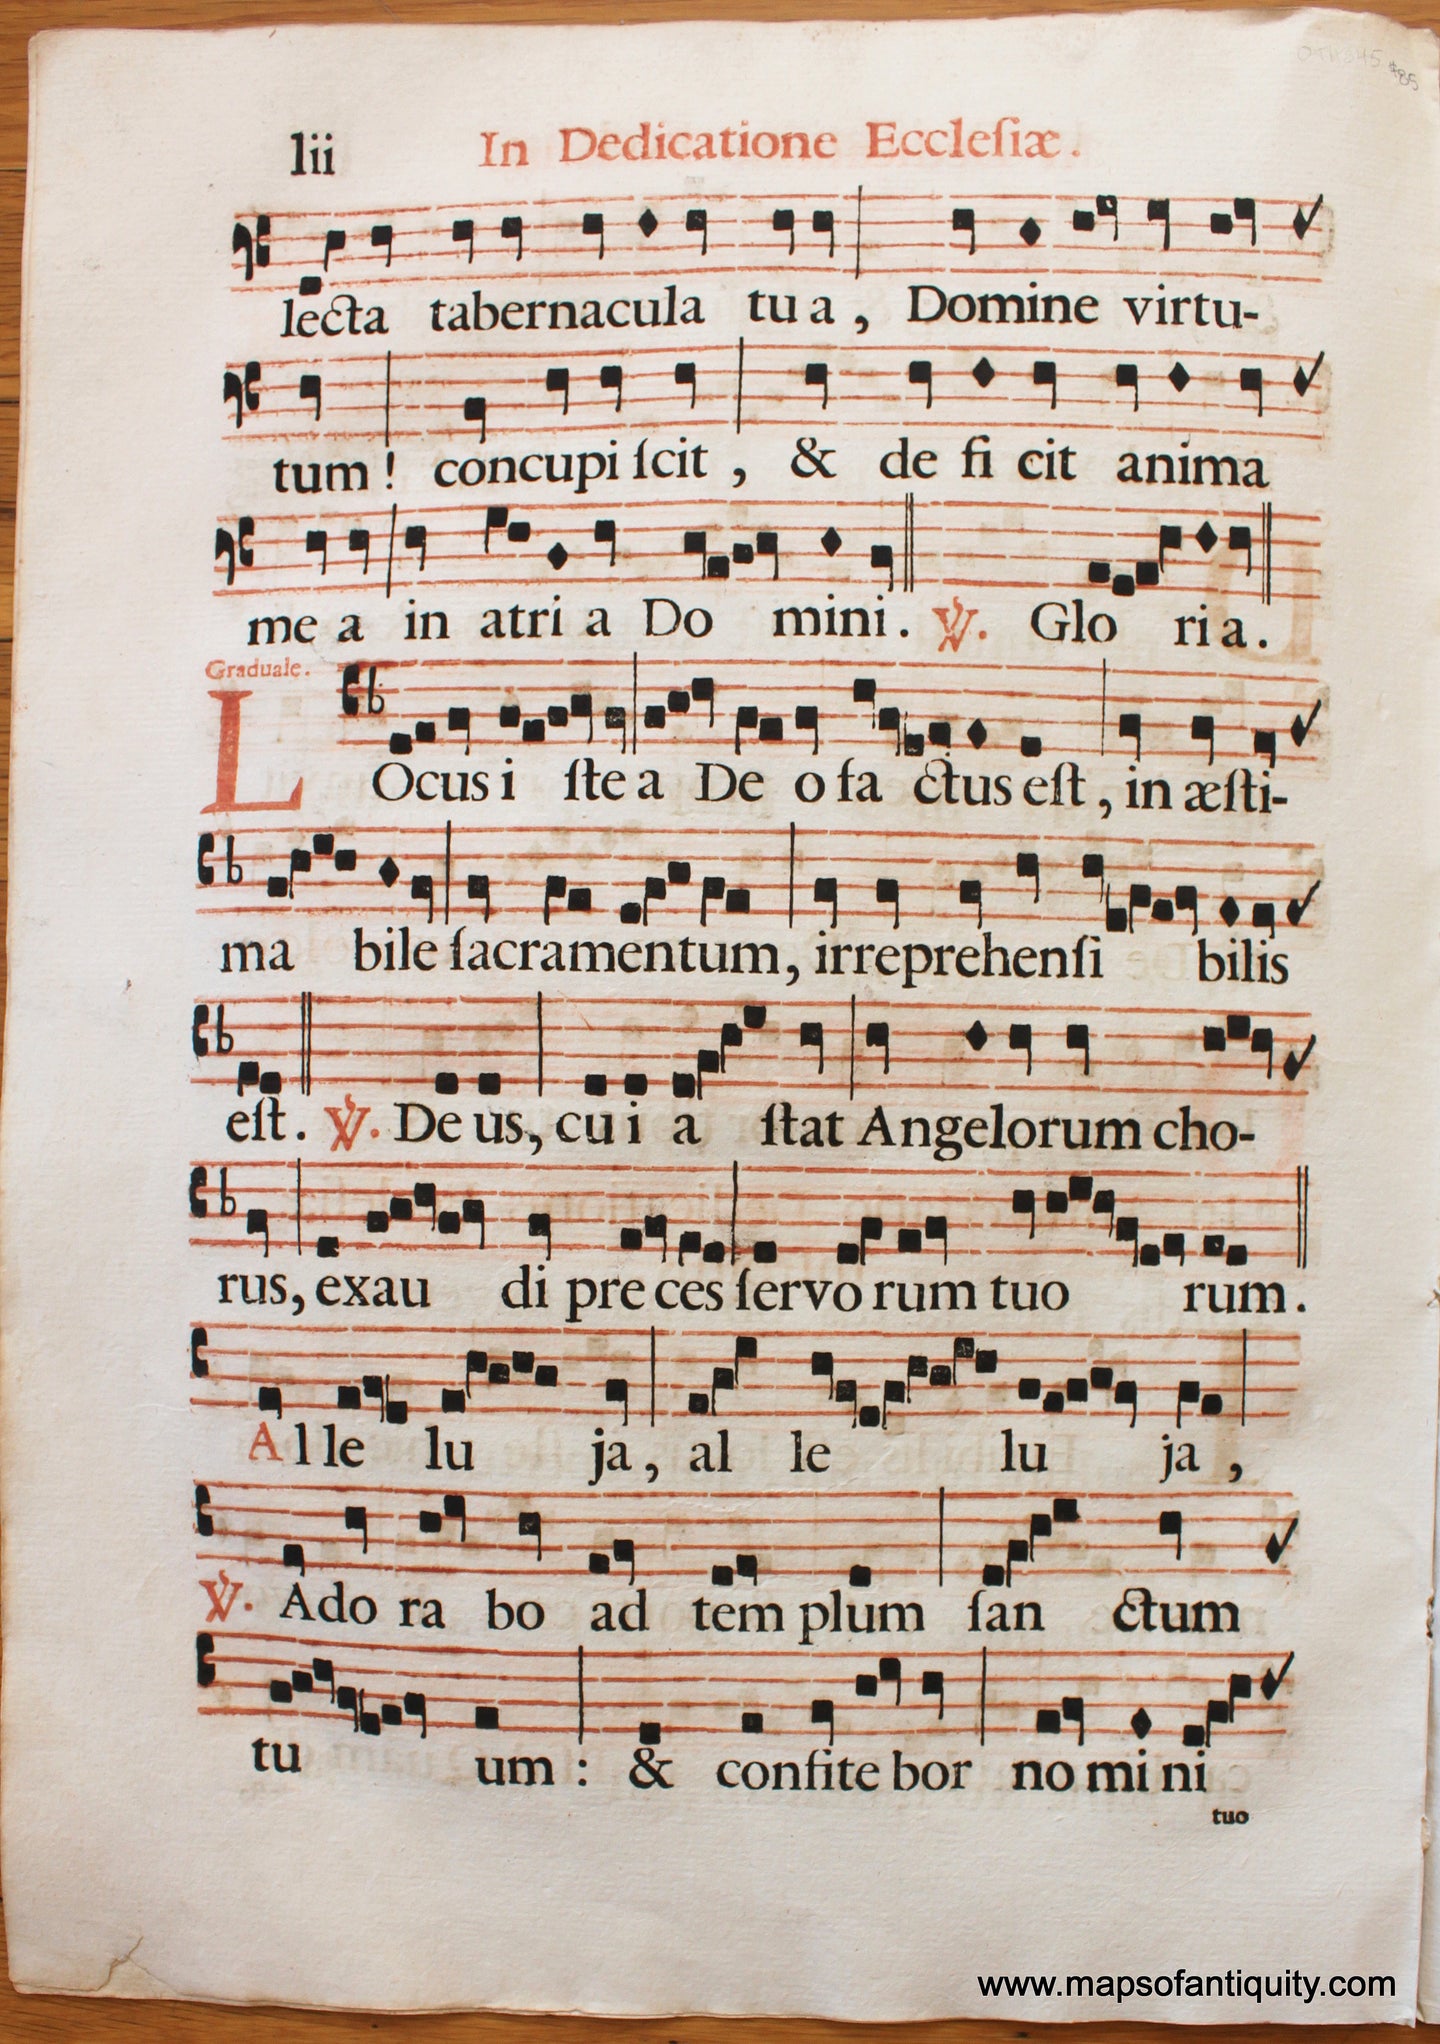 Antique-Sheet-Music-on-Paper-Antique-Sheet-Music-In-Dedicatione-Ecclesiae-c.-16th-century-Unknown-Antique-Sheet-Music-1500s-16th-century-Maps-of-Antiquity